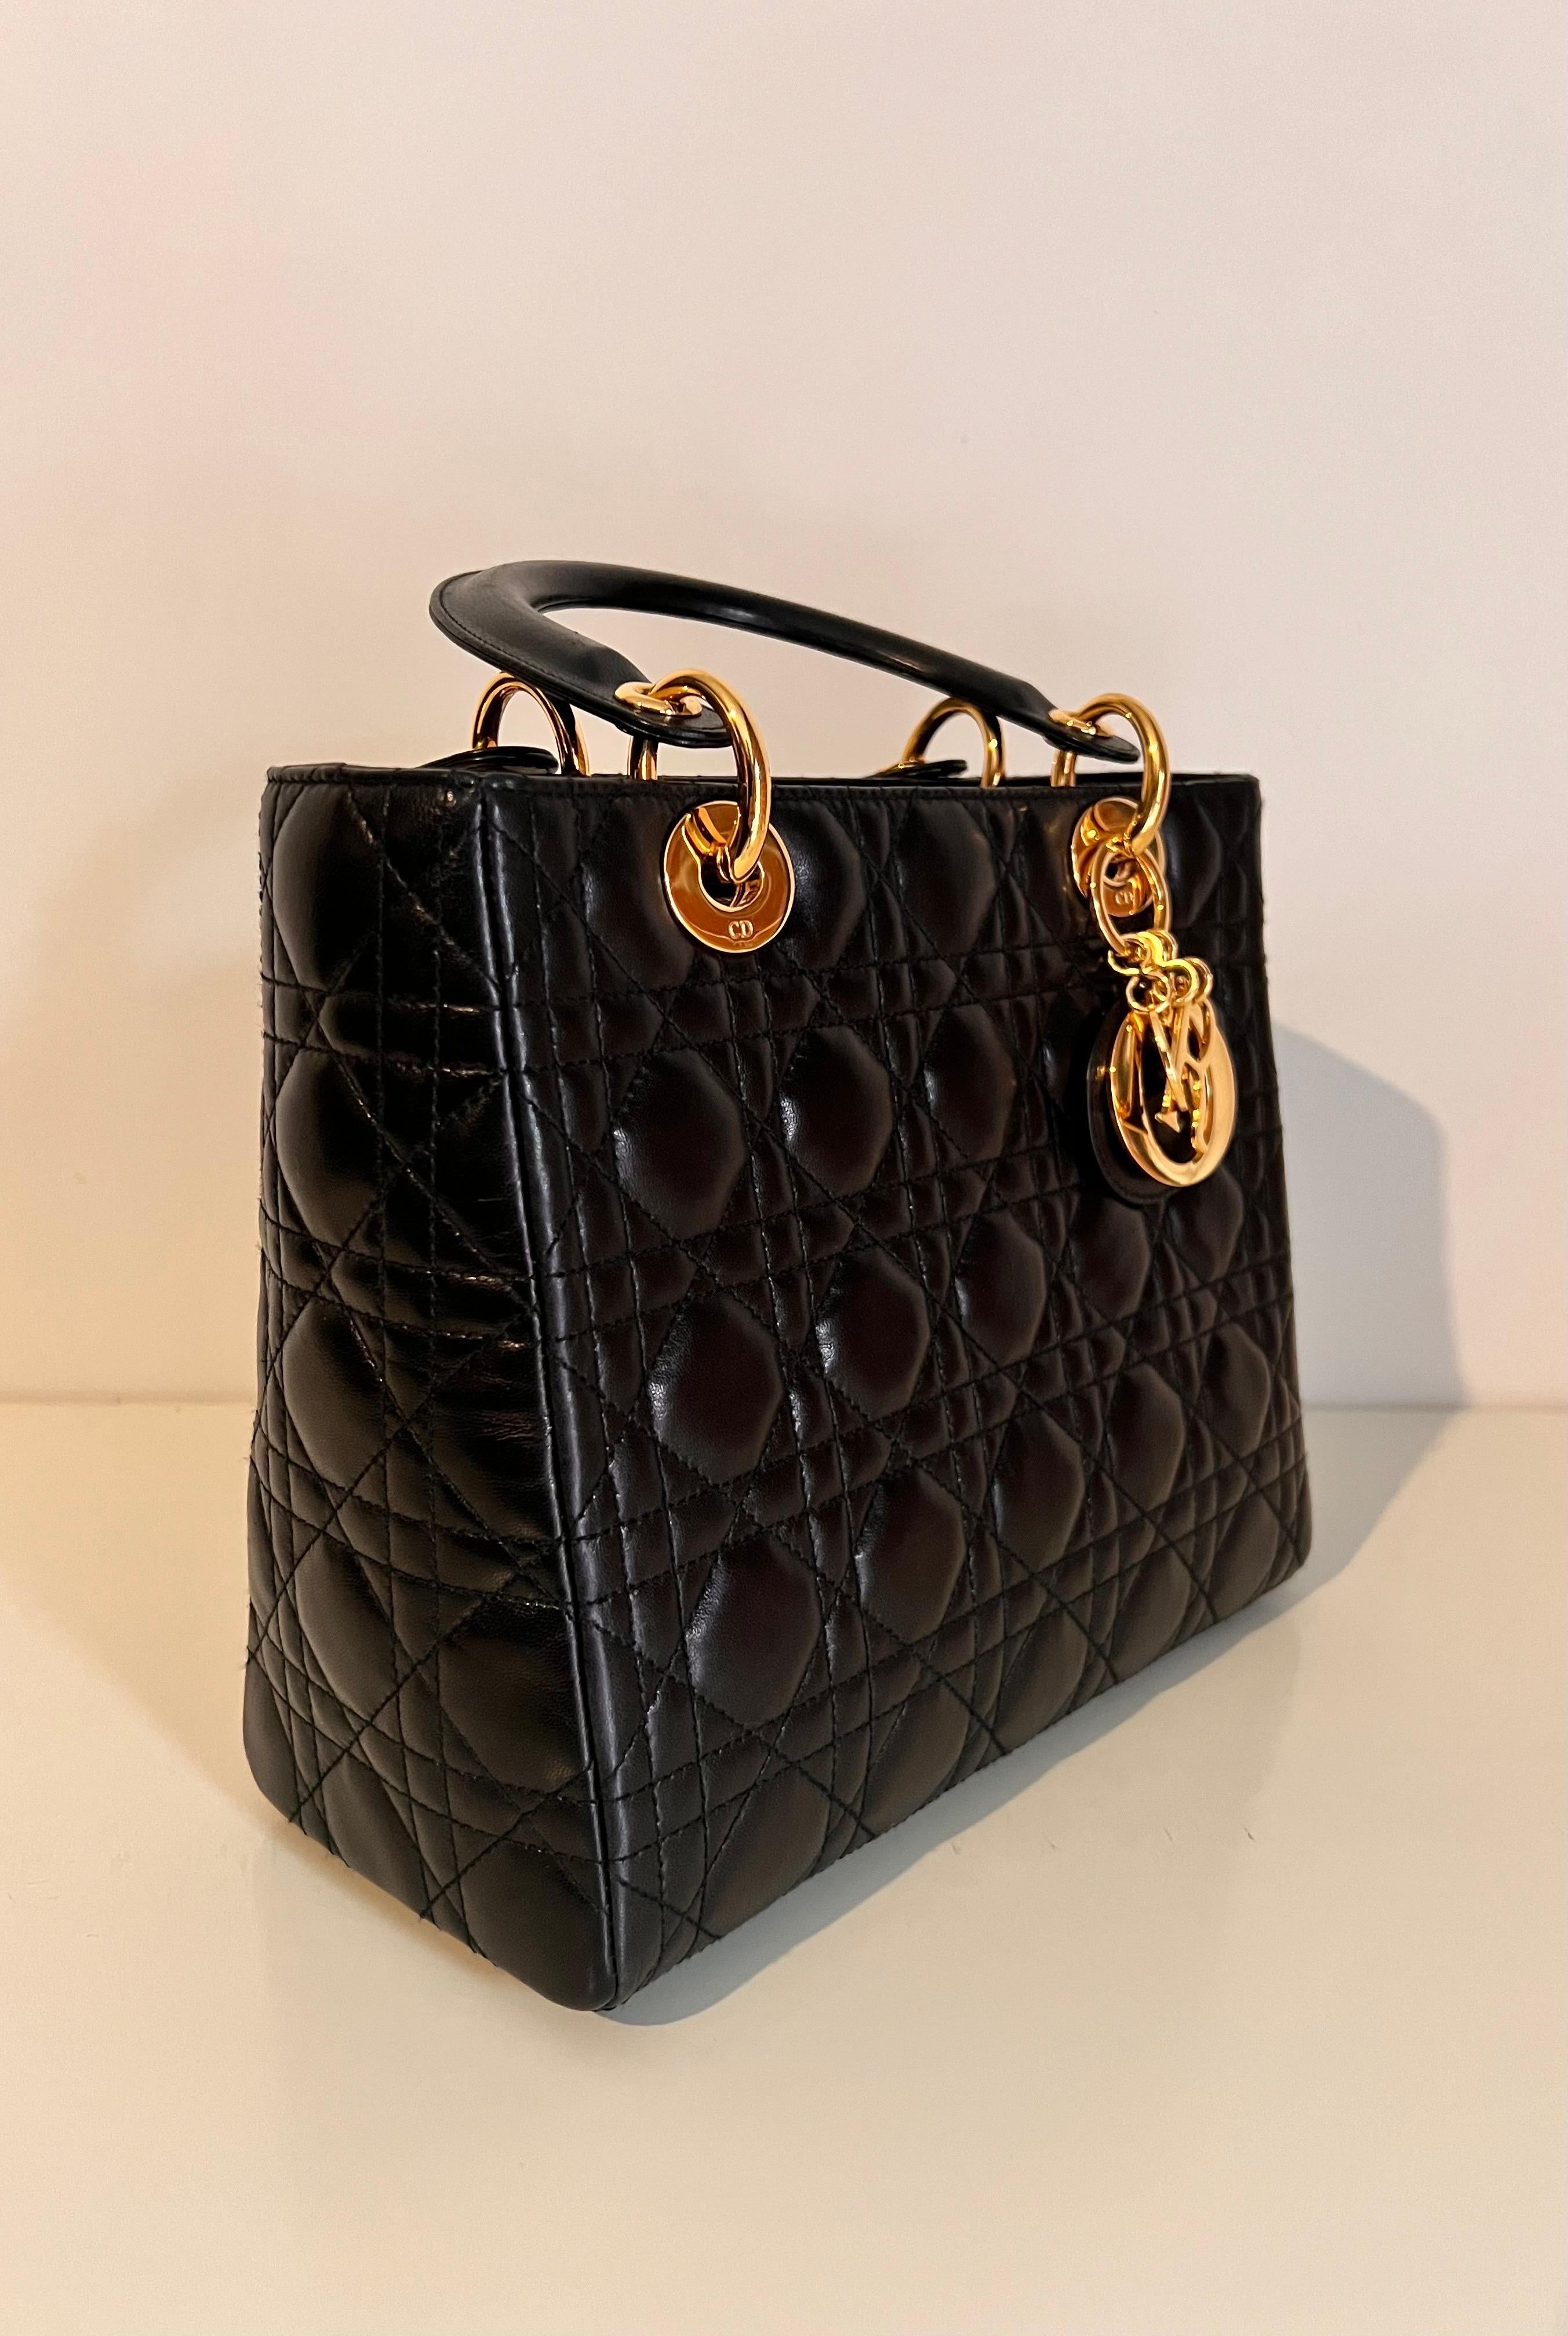 Lady DIOR quilted handbag in black with gold Dior hardware, famously worn by Princess Diana.  The Lady Dior bag epitomizes the House's vision of elegance and beauty. Sleek and refined, the timeless creation is crafted in black lambskin with Cannage